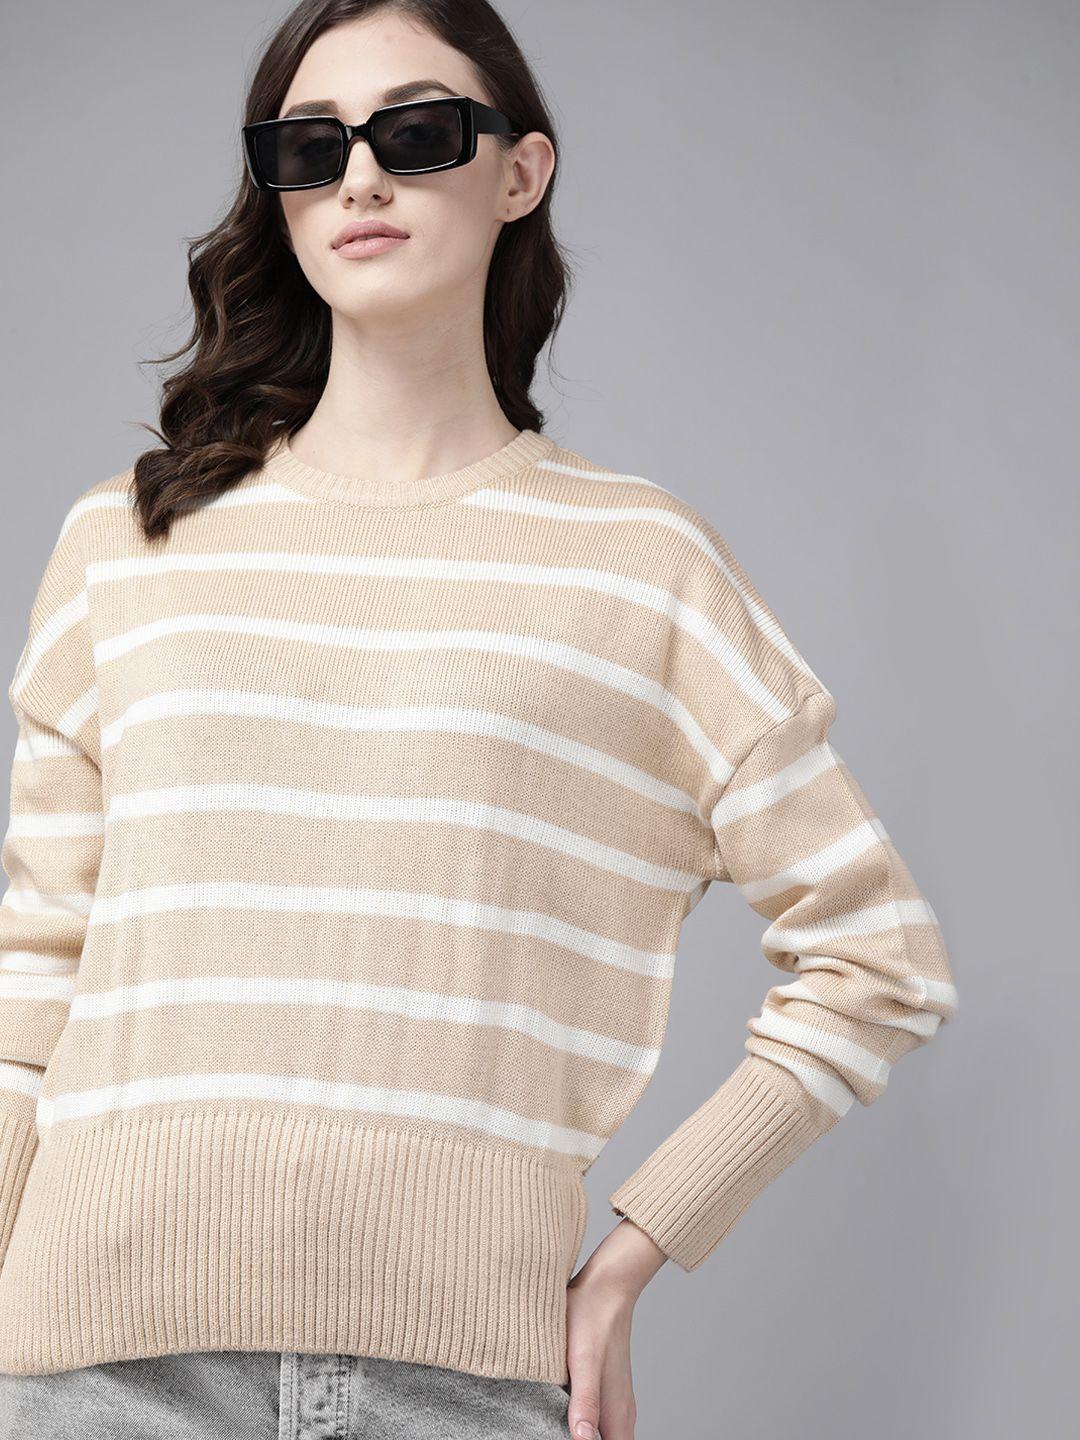 the roadster lifestyle co. women beige & off white striped acrylic sweater